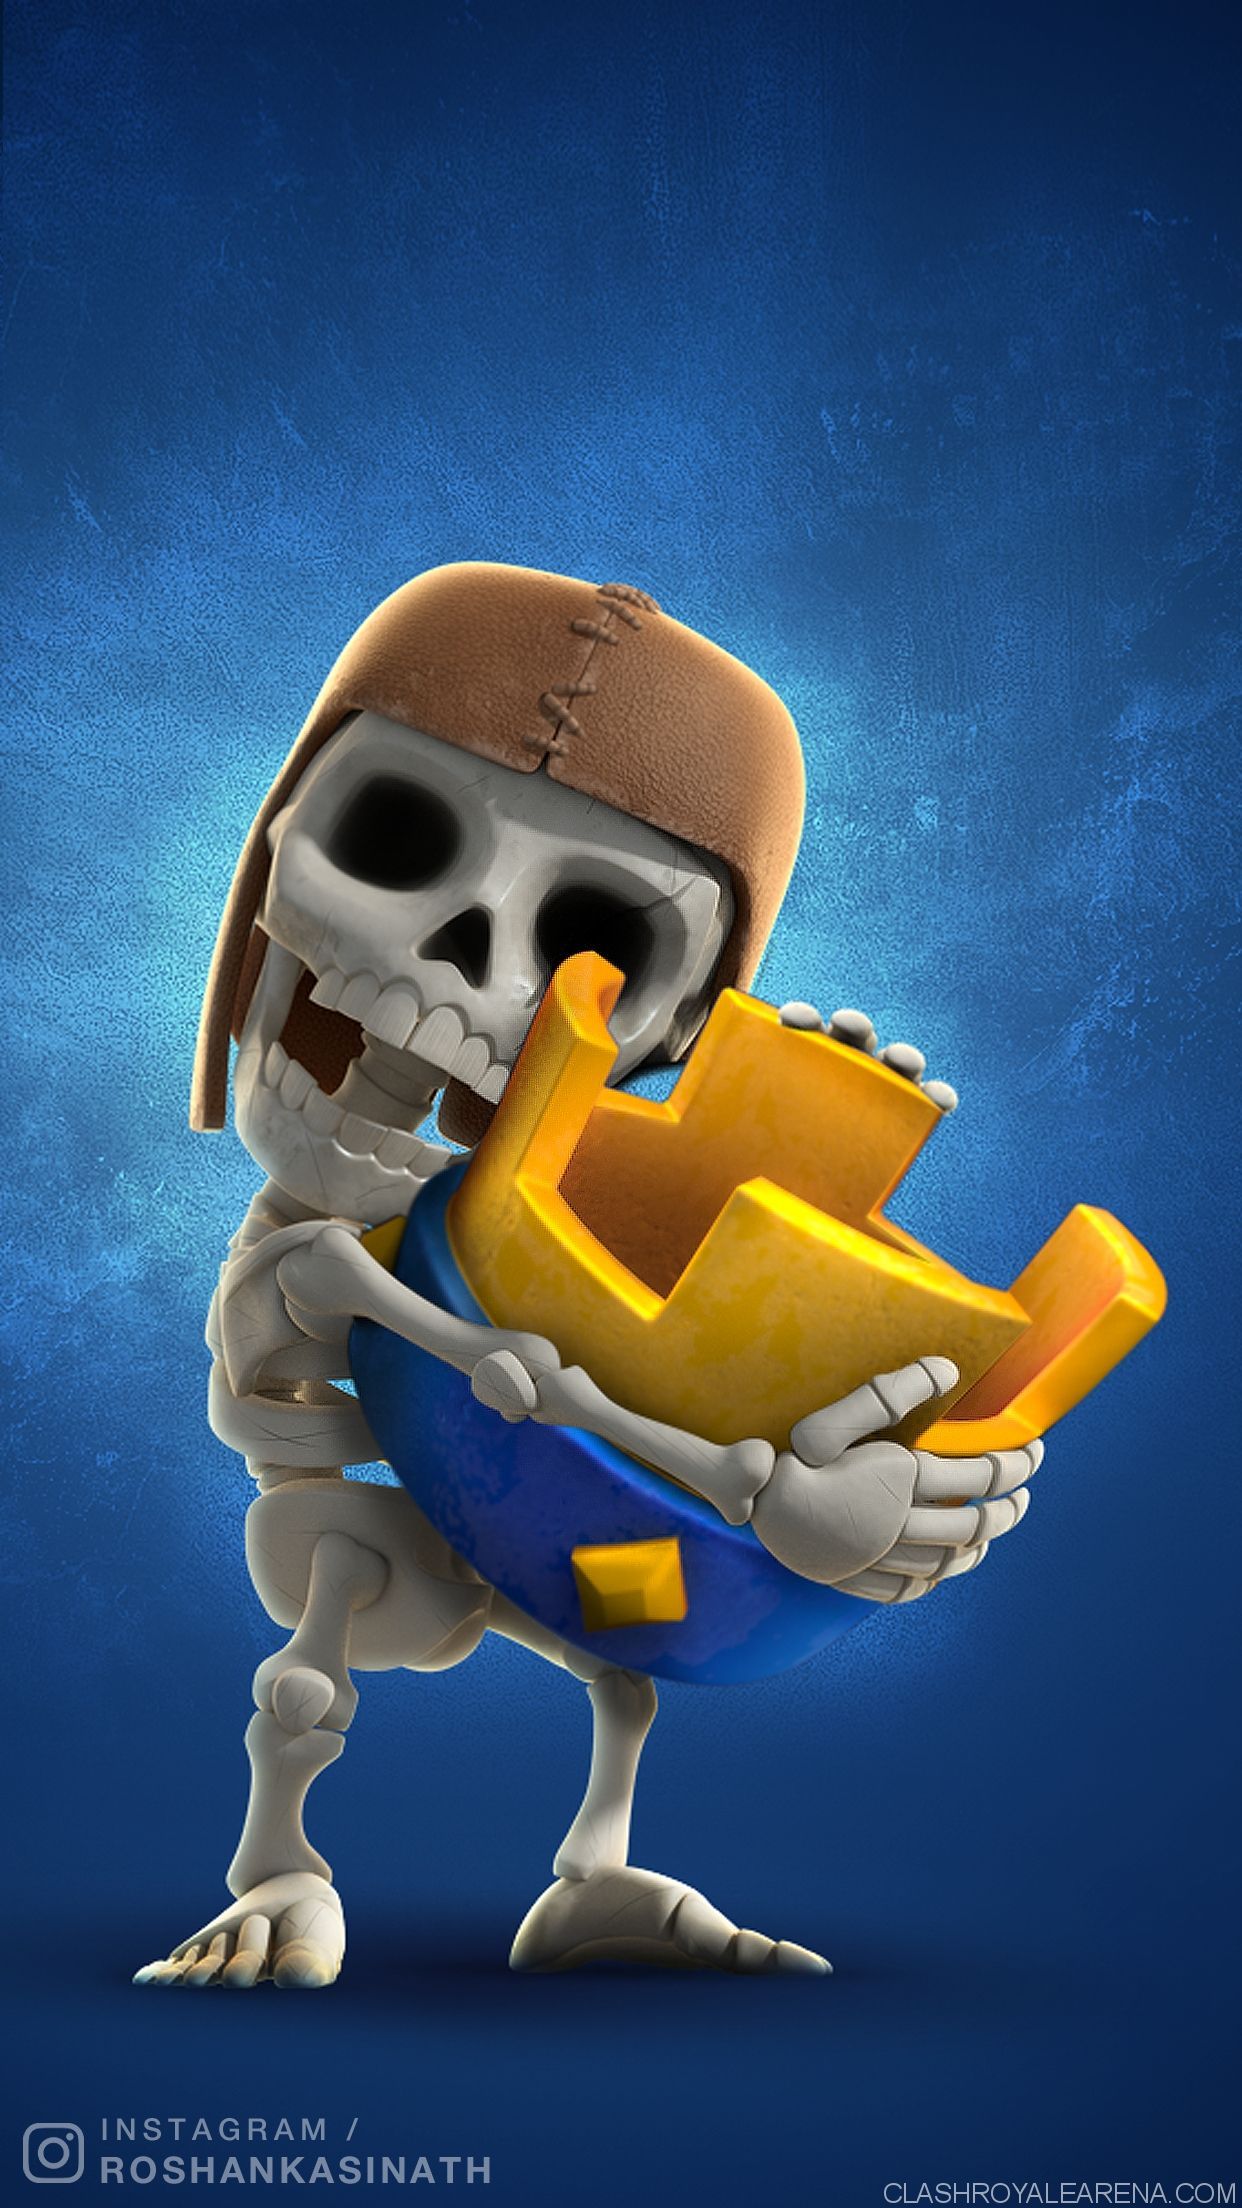 New Clash Royale Phone Wallpaper FULL HD 1920×1080 For PC